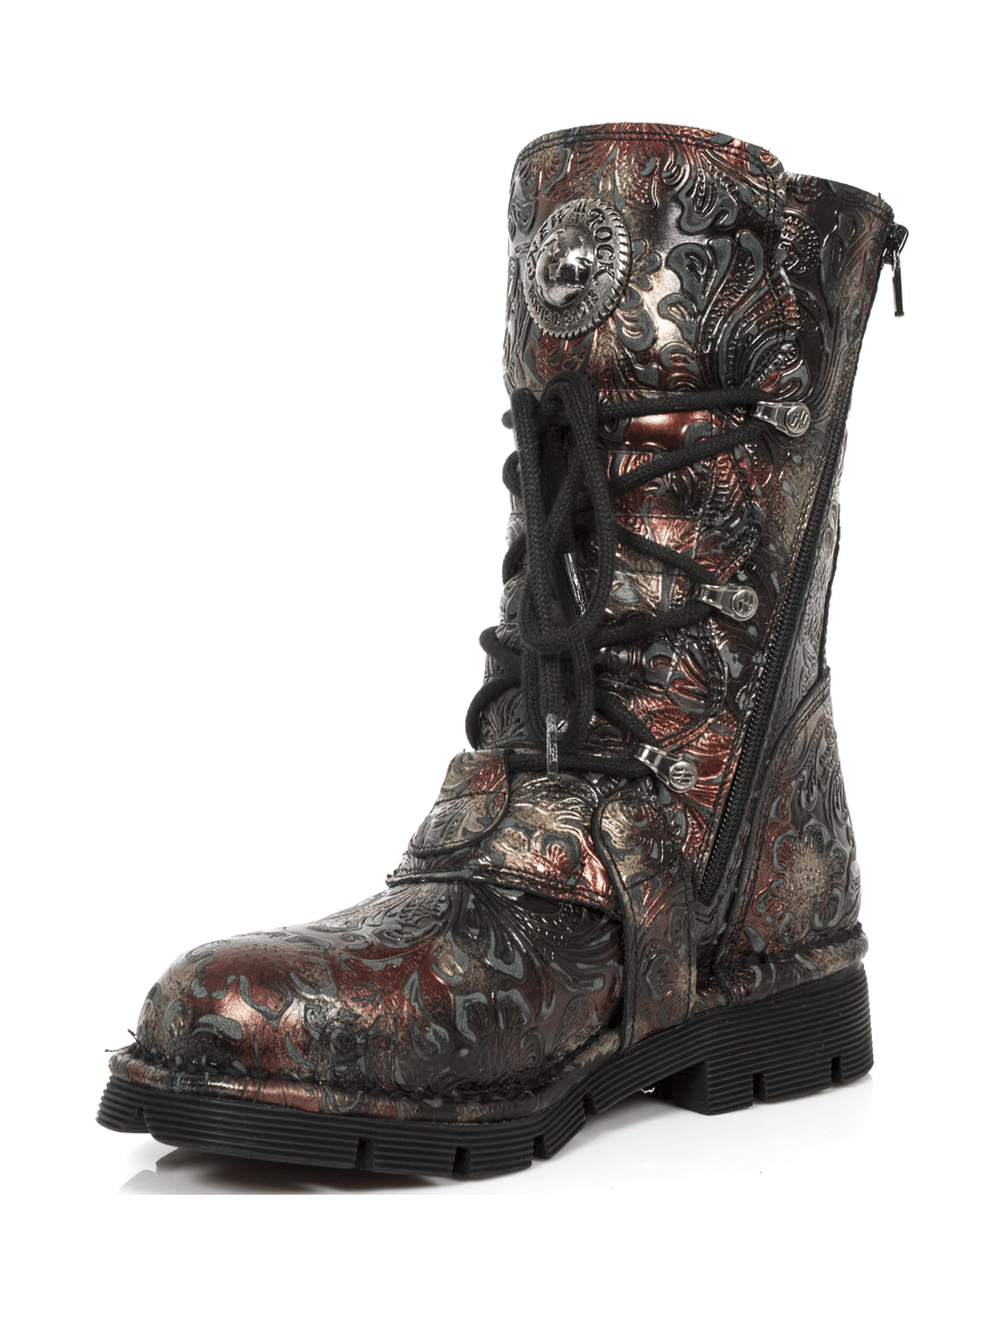 NEW ROCK Embossed Gothic Buckle Boots in Red Leather